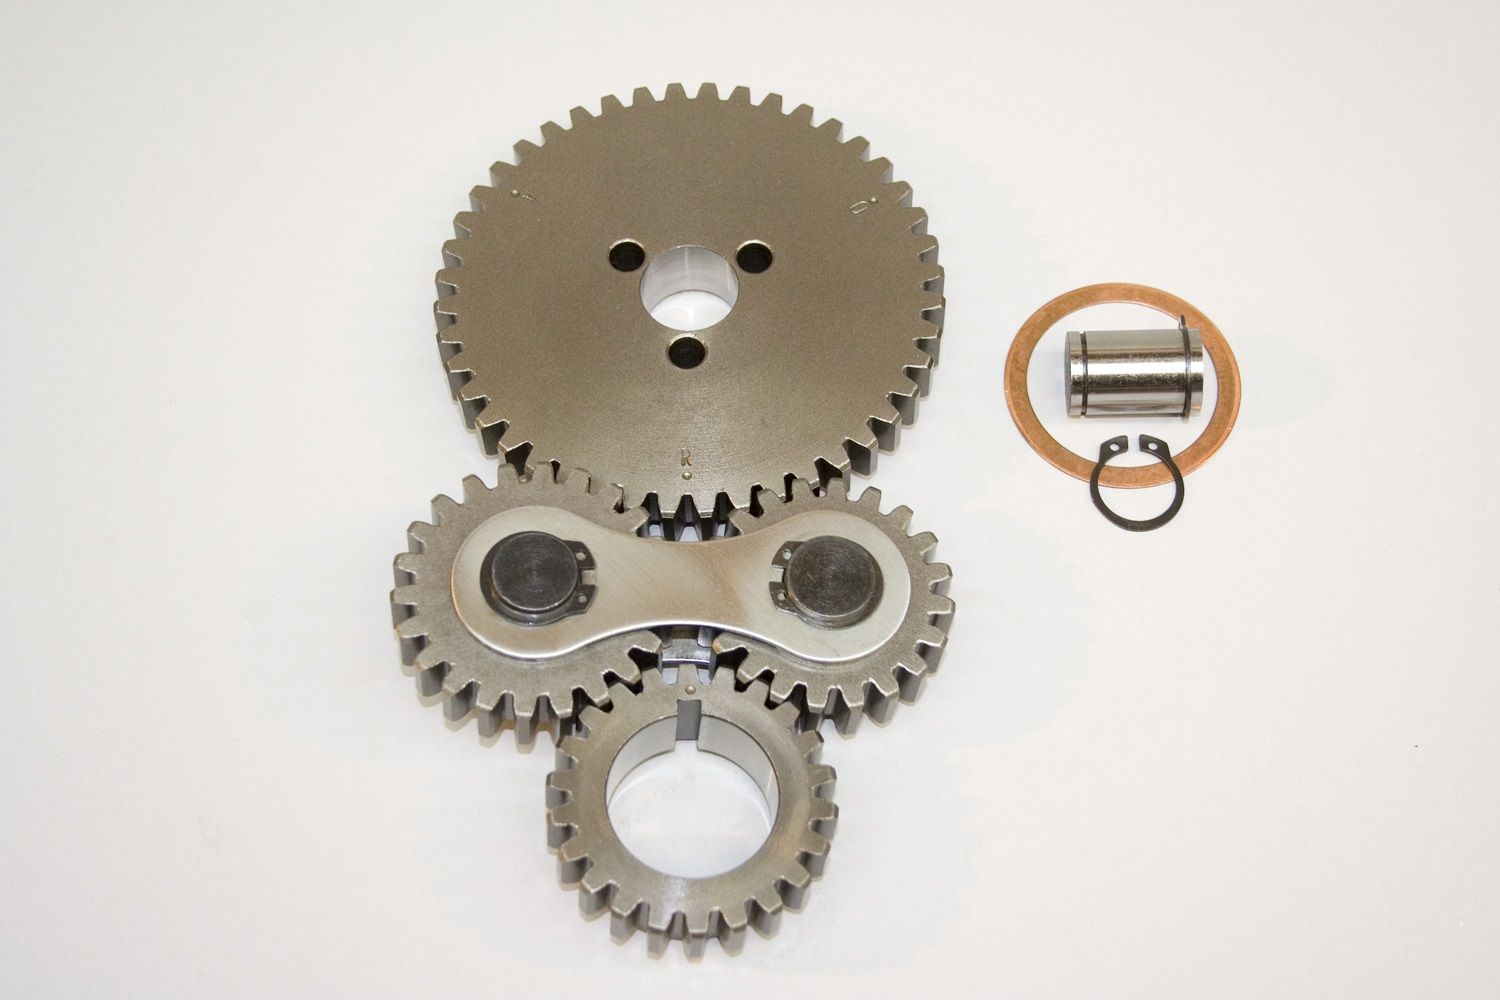 Converts Timing Chain To Gears; Dual Idler; Noisy; Includes Steel Alloy Gea...